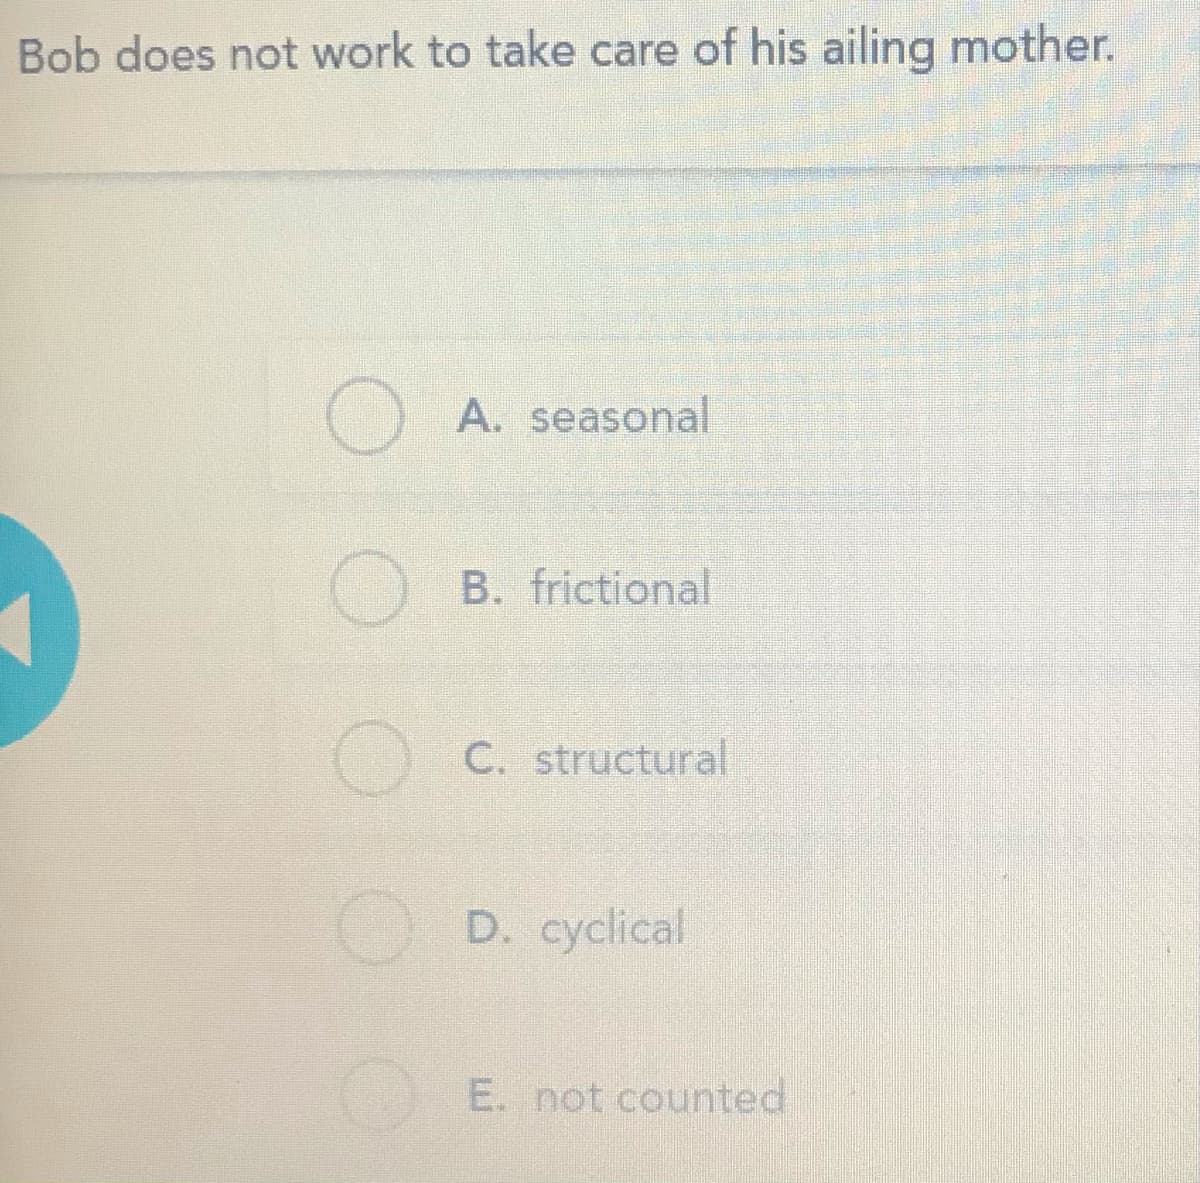 Bob does not work to take care of his ailing mother.
A. seasonal
B. frictional
O C. structural
D. cyclical
E. not counted
